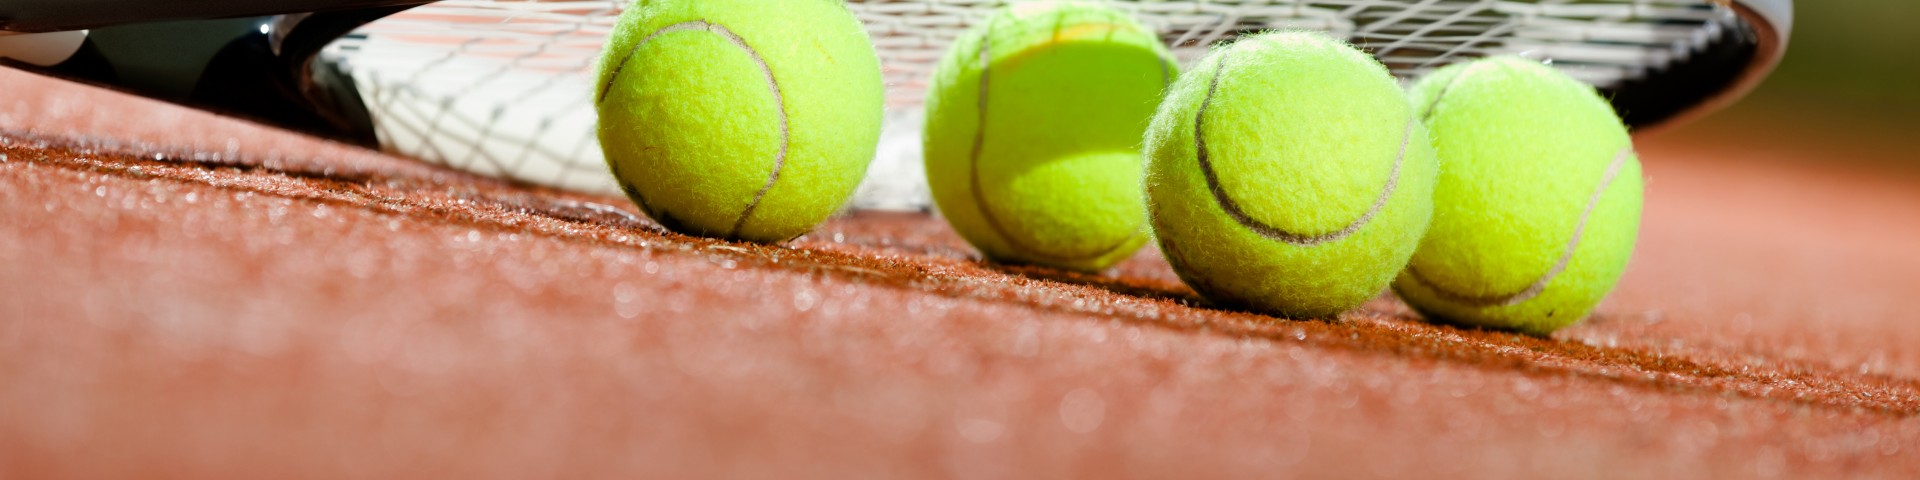 Stafford Tennis League Offering Friendly Competitive Tennis For All ...